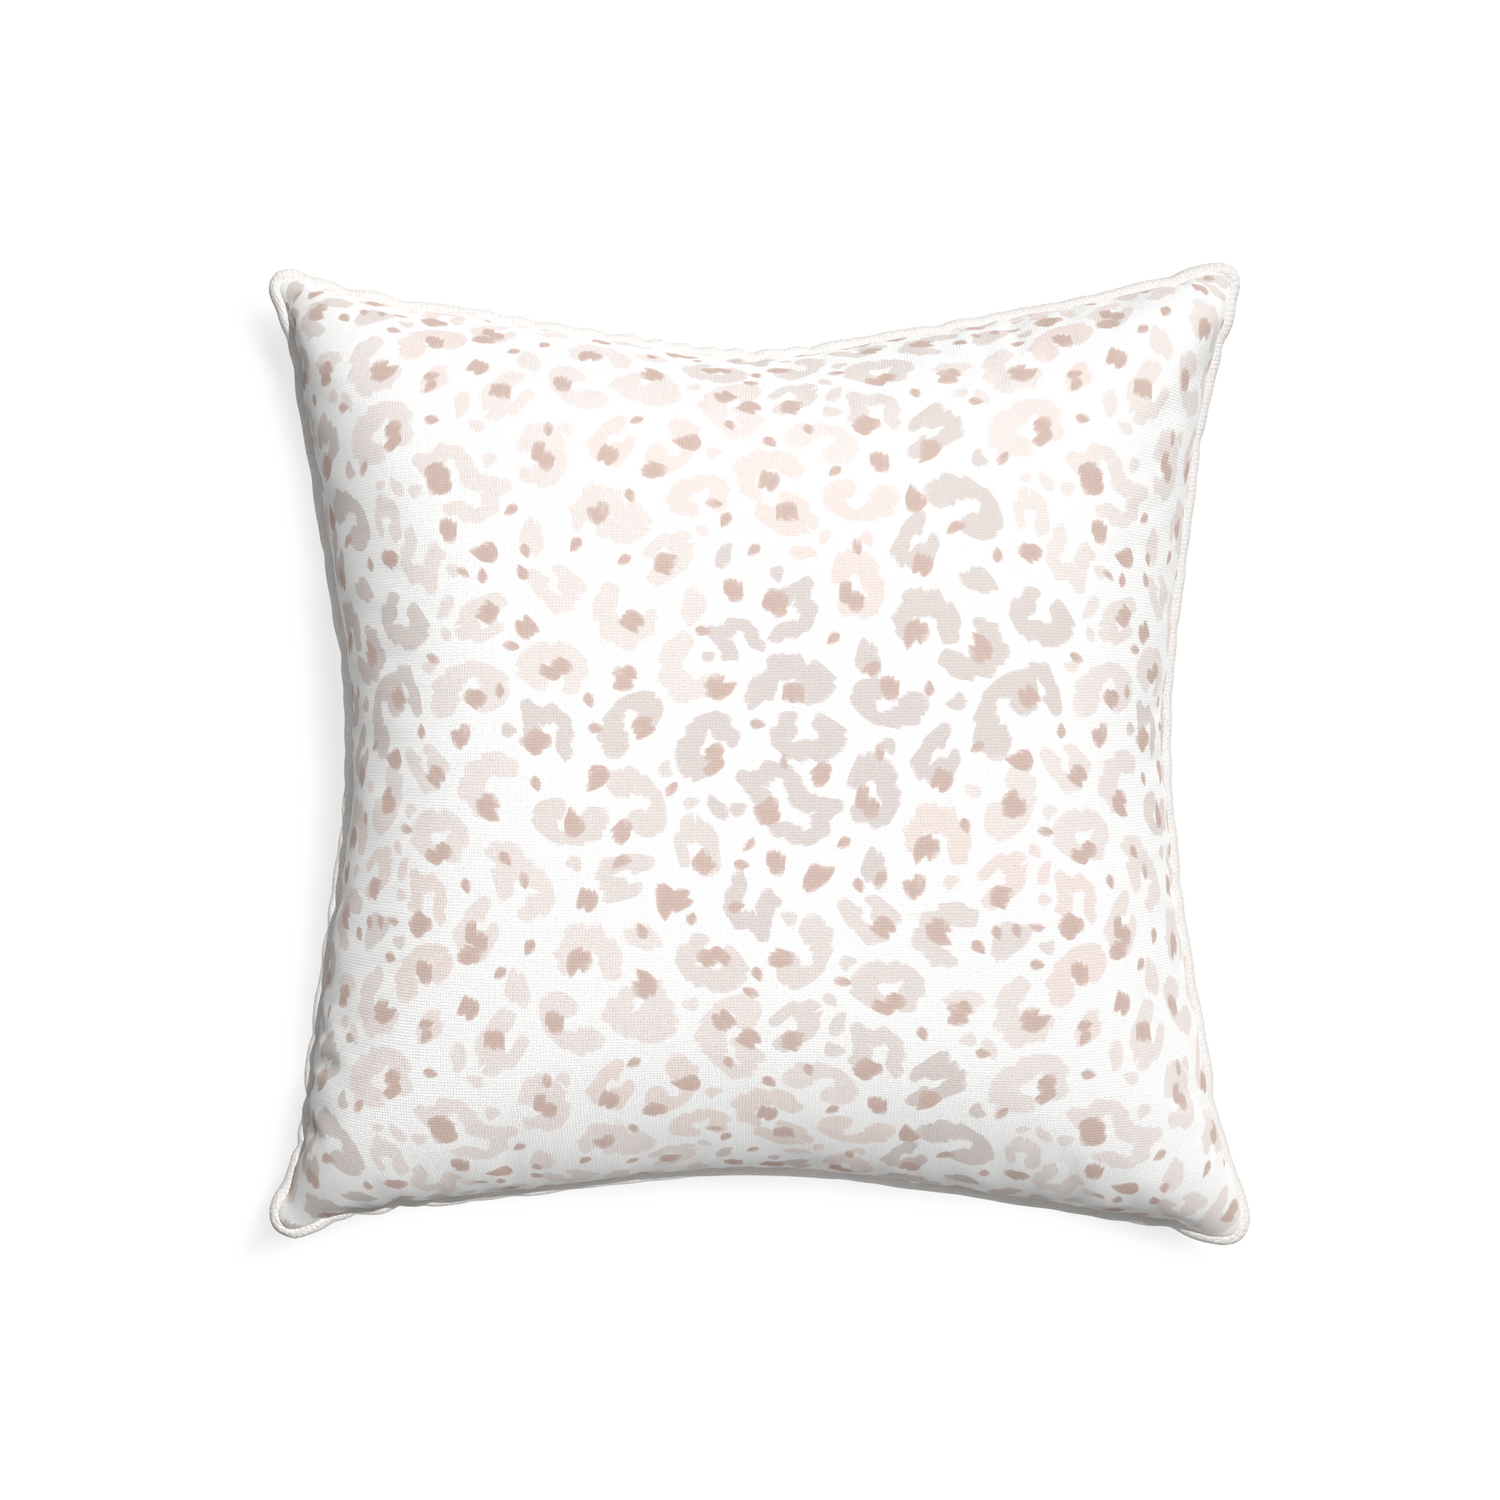 22-square rosie custom pillow with snow piping on white background